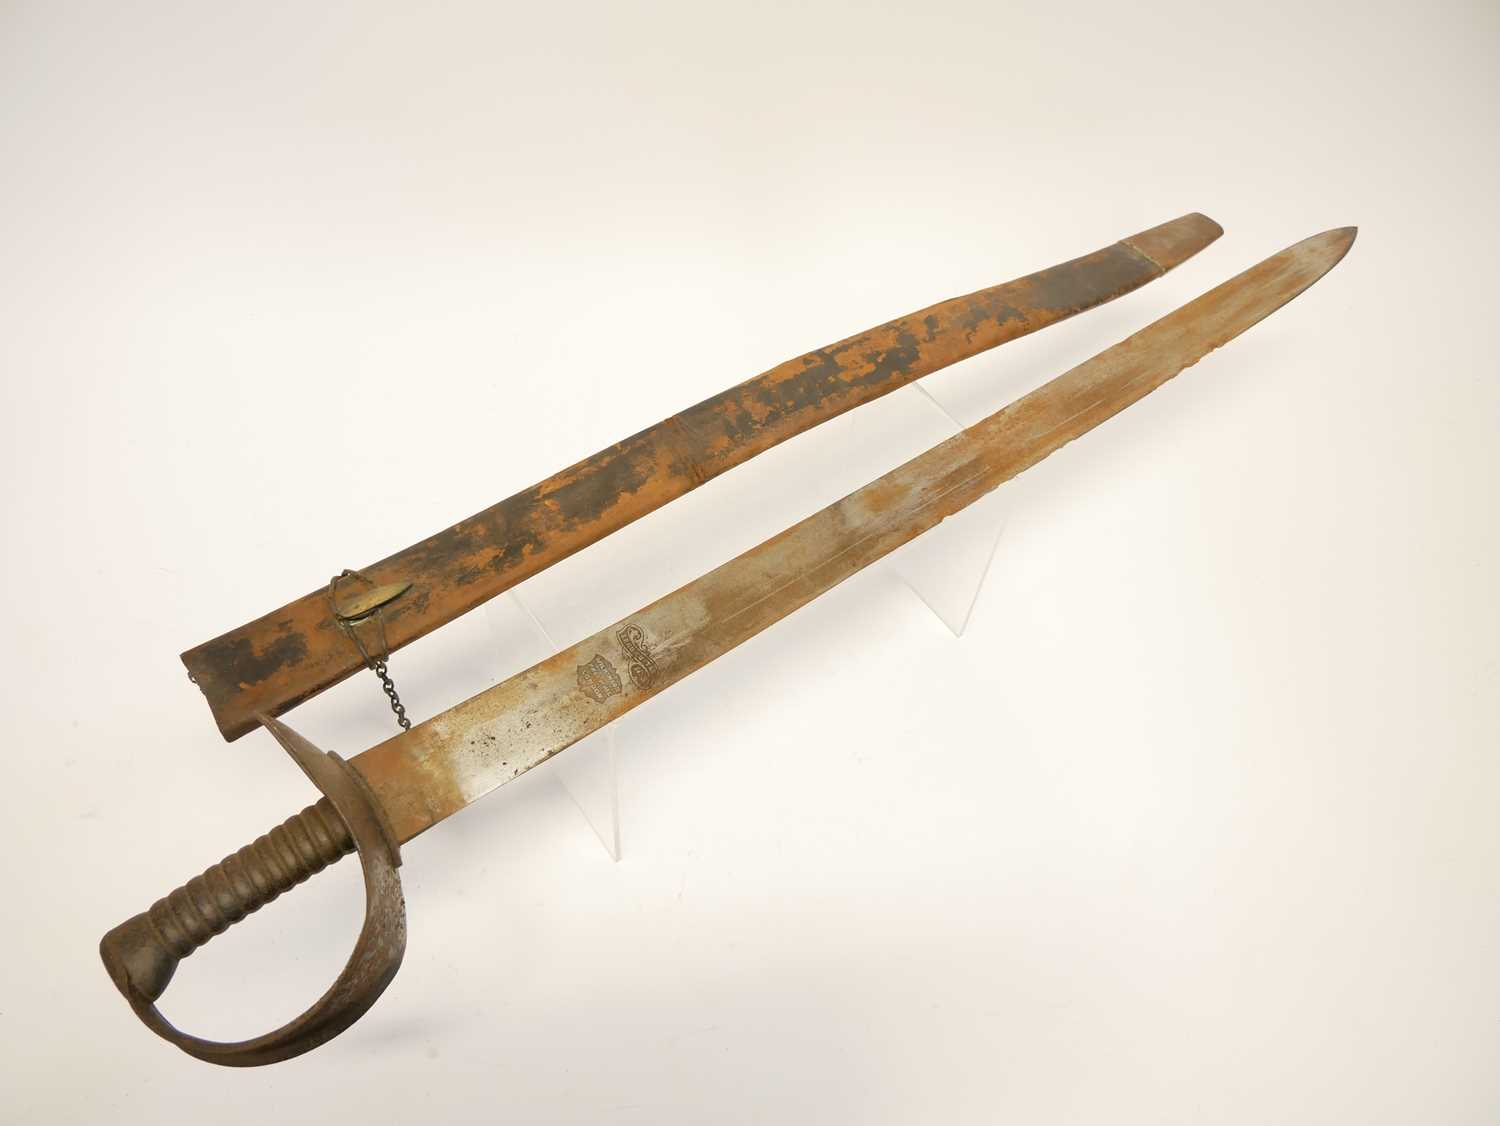 Wilkinson lead cutter No.3 sword, for strength training and feats of swordsmanship, 32.5-inch - Image 2 of 11